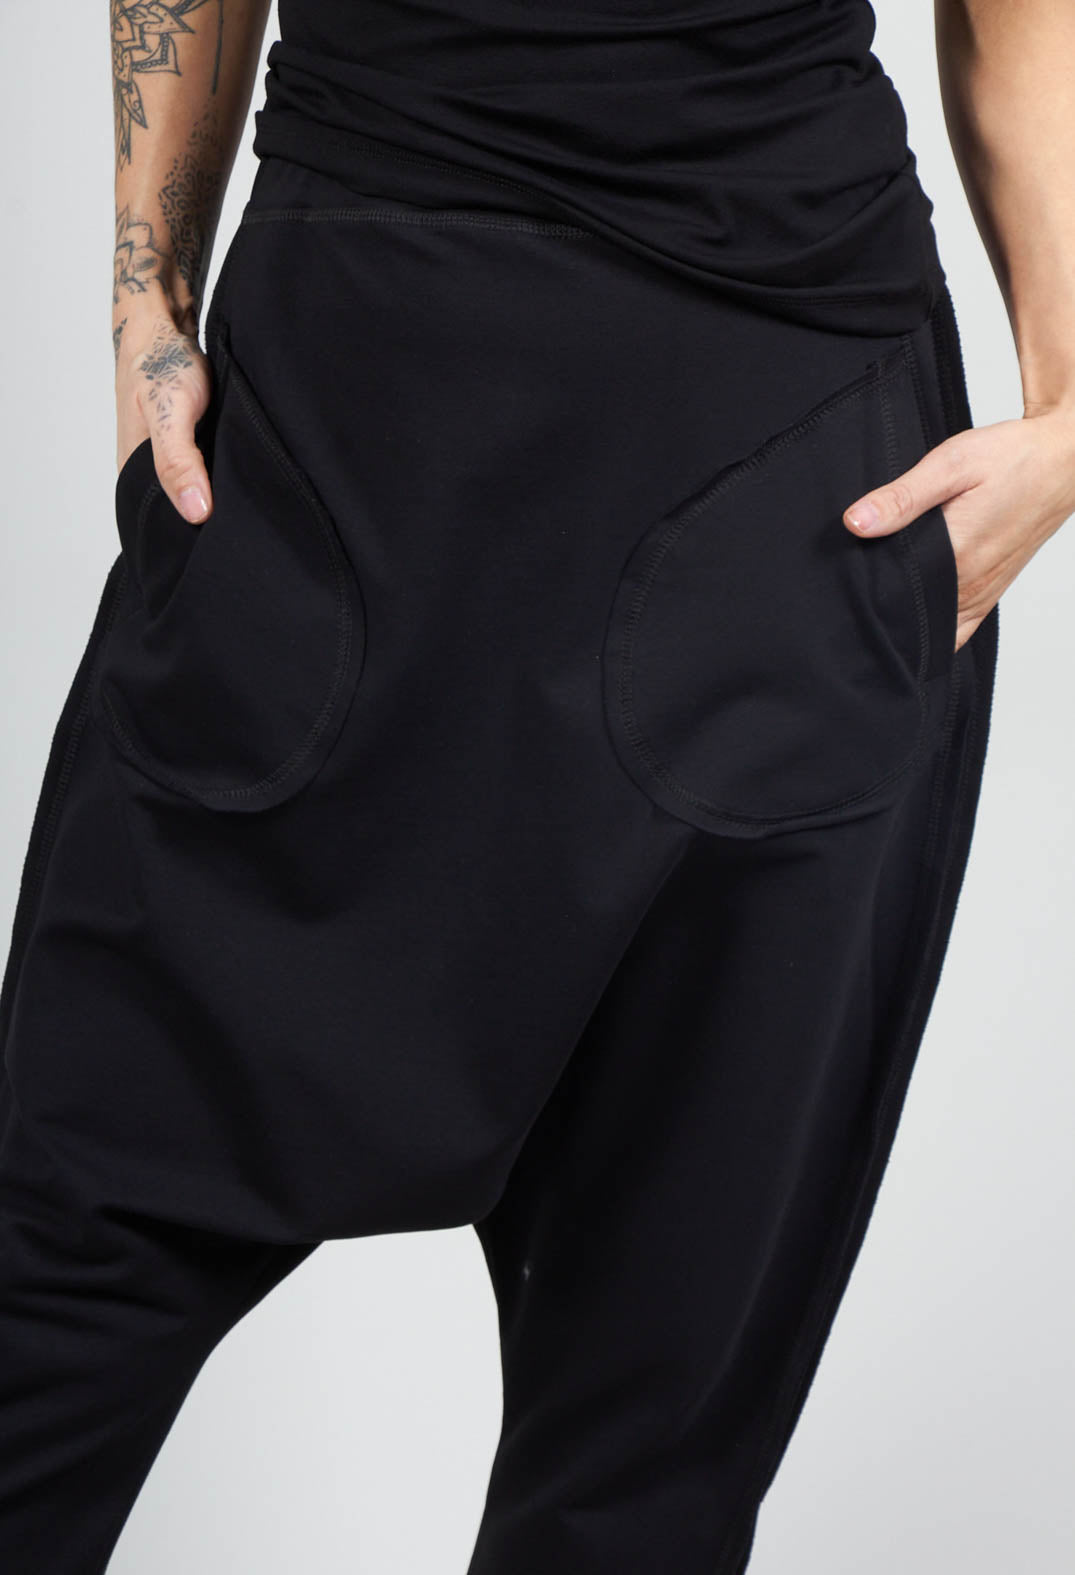 Noma Trousers in Black